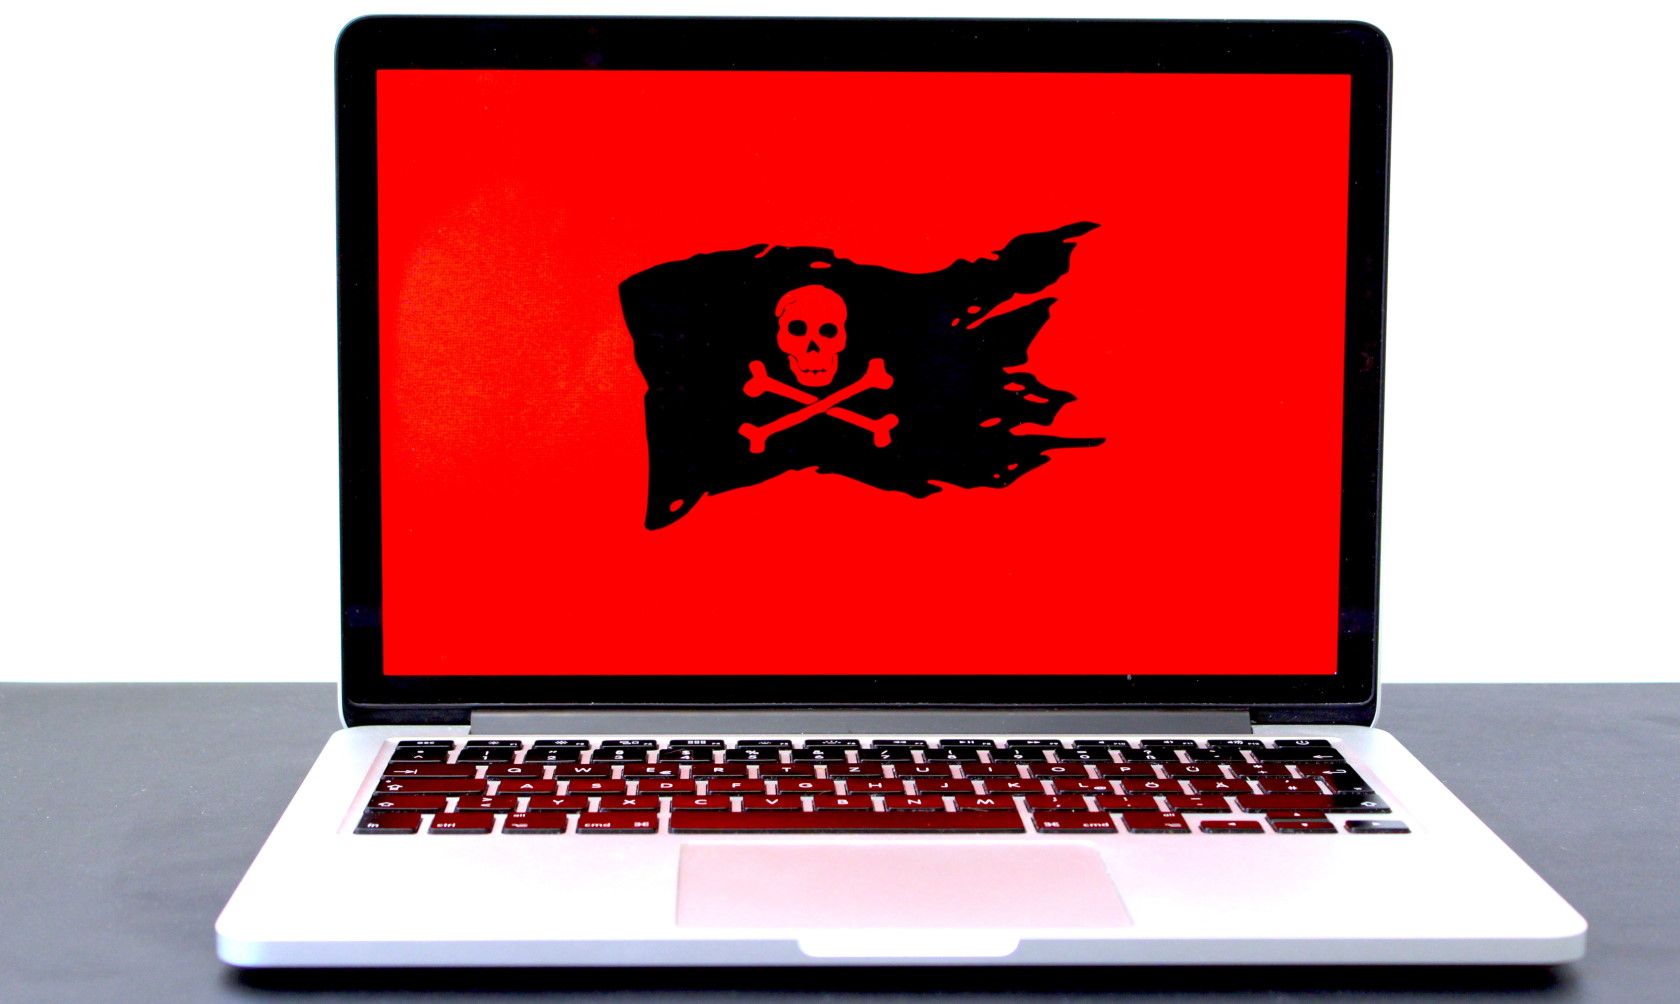 Skull and crossbones pirate flag displayed on red laptop screen